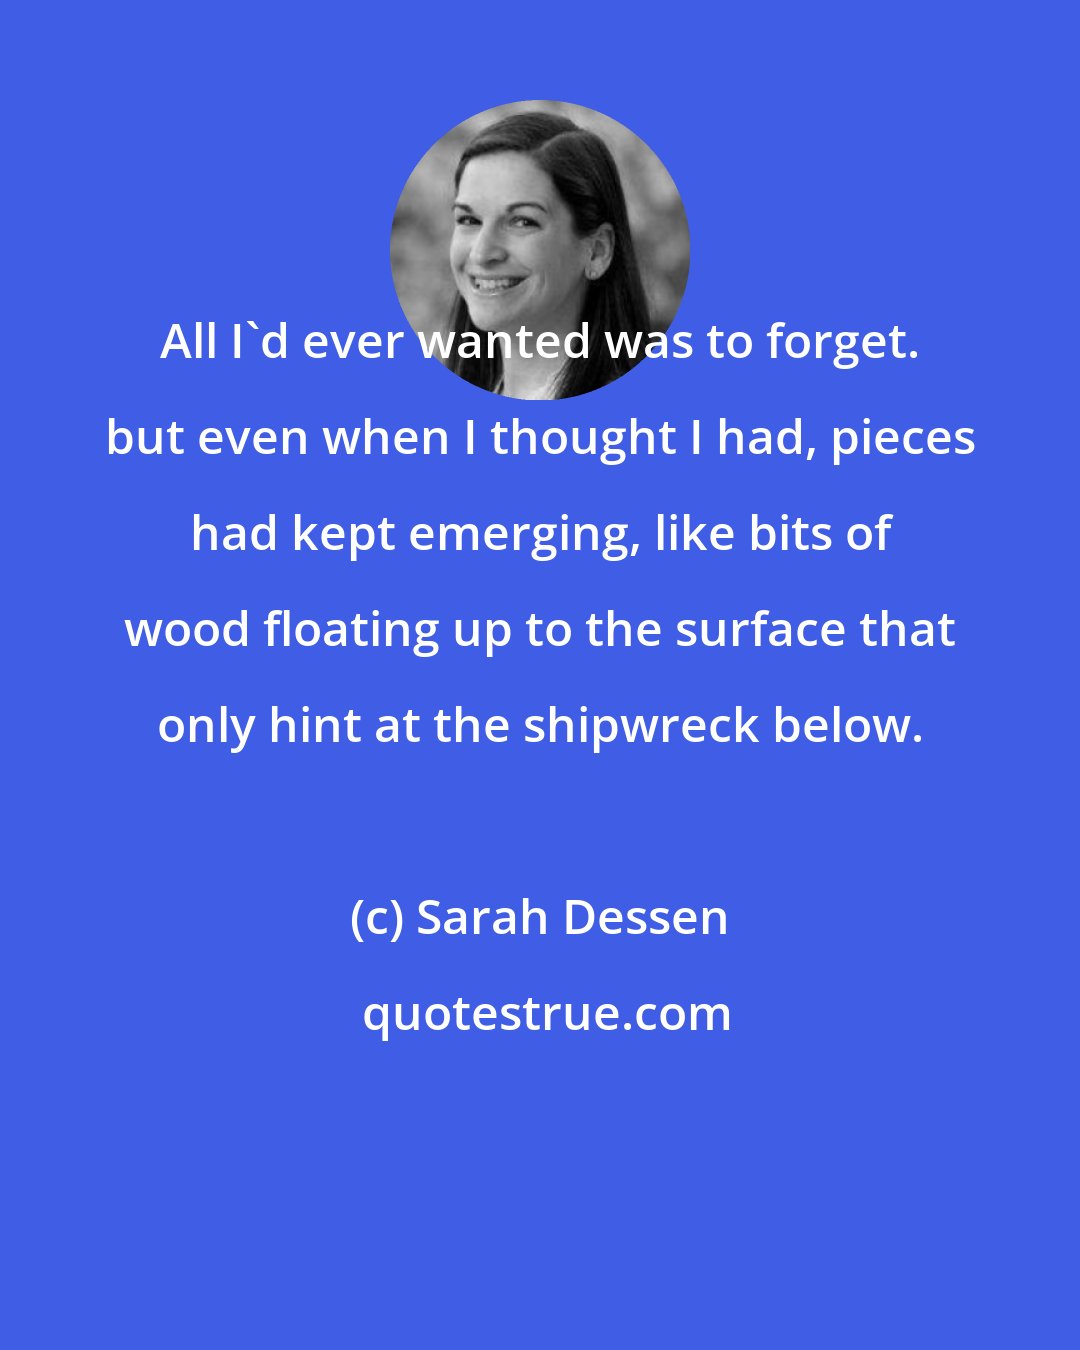 Sarah Dessen: All I'd ever wanted was to forget. but even when I thought I had, pieces had kept emerging, like bits of wood floating up to the surface that only hint at the shipwreck below.